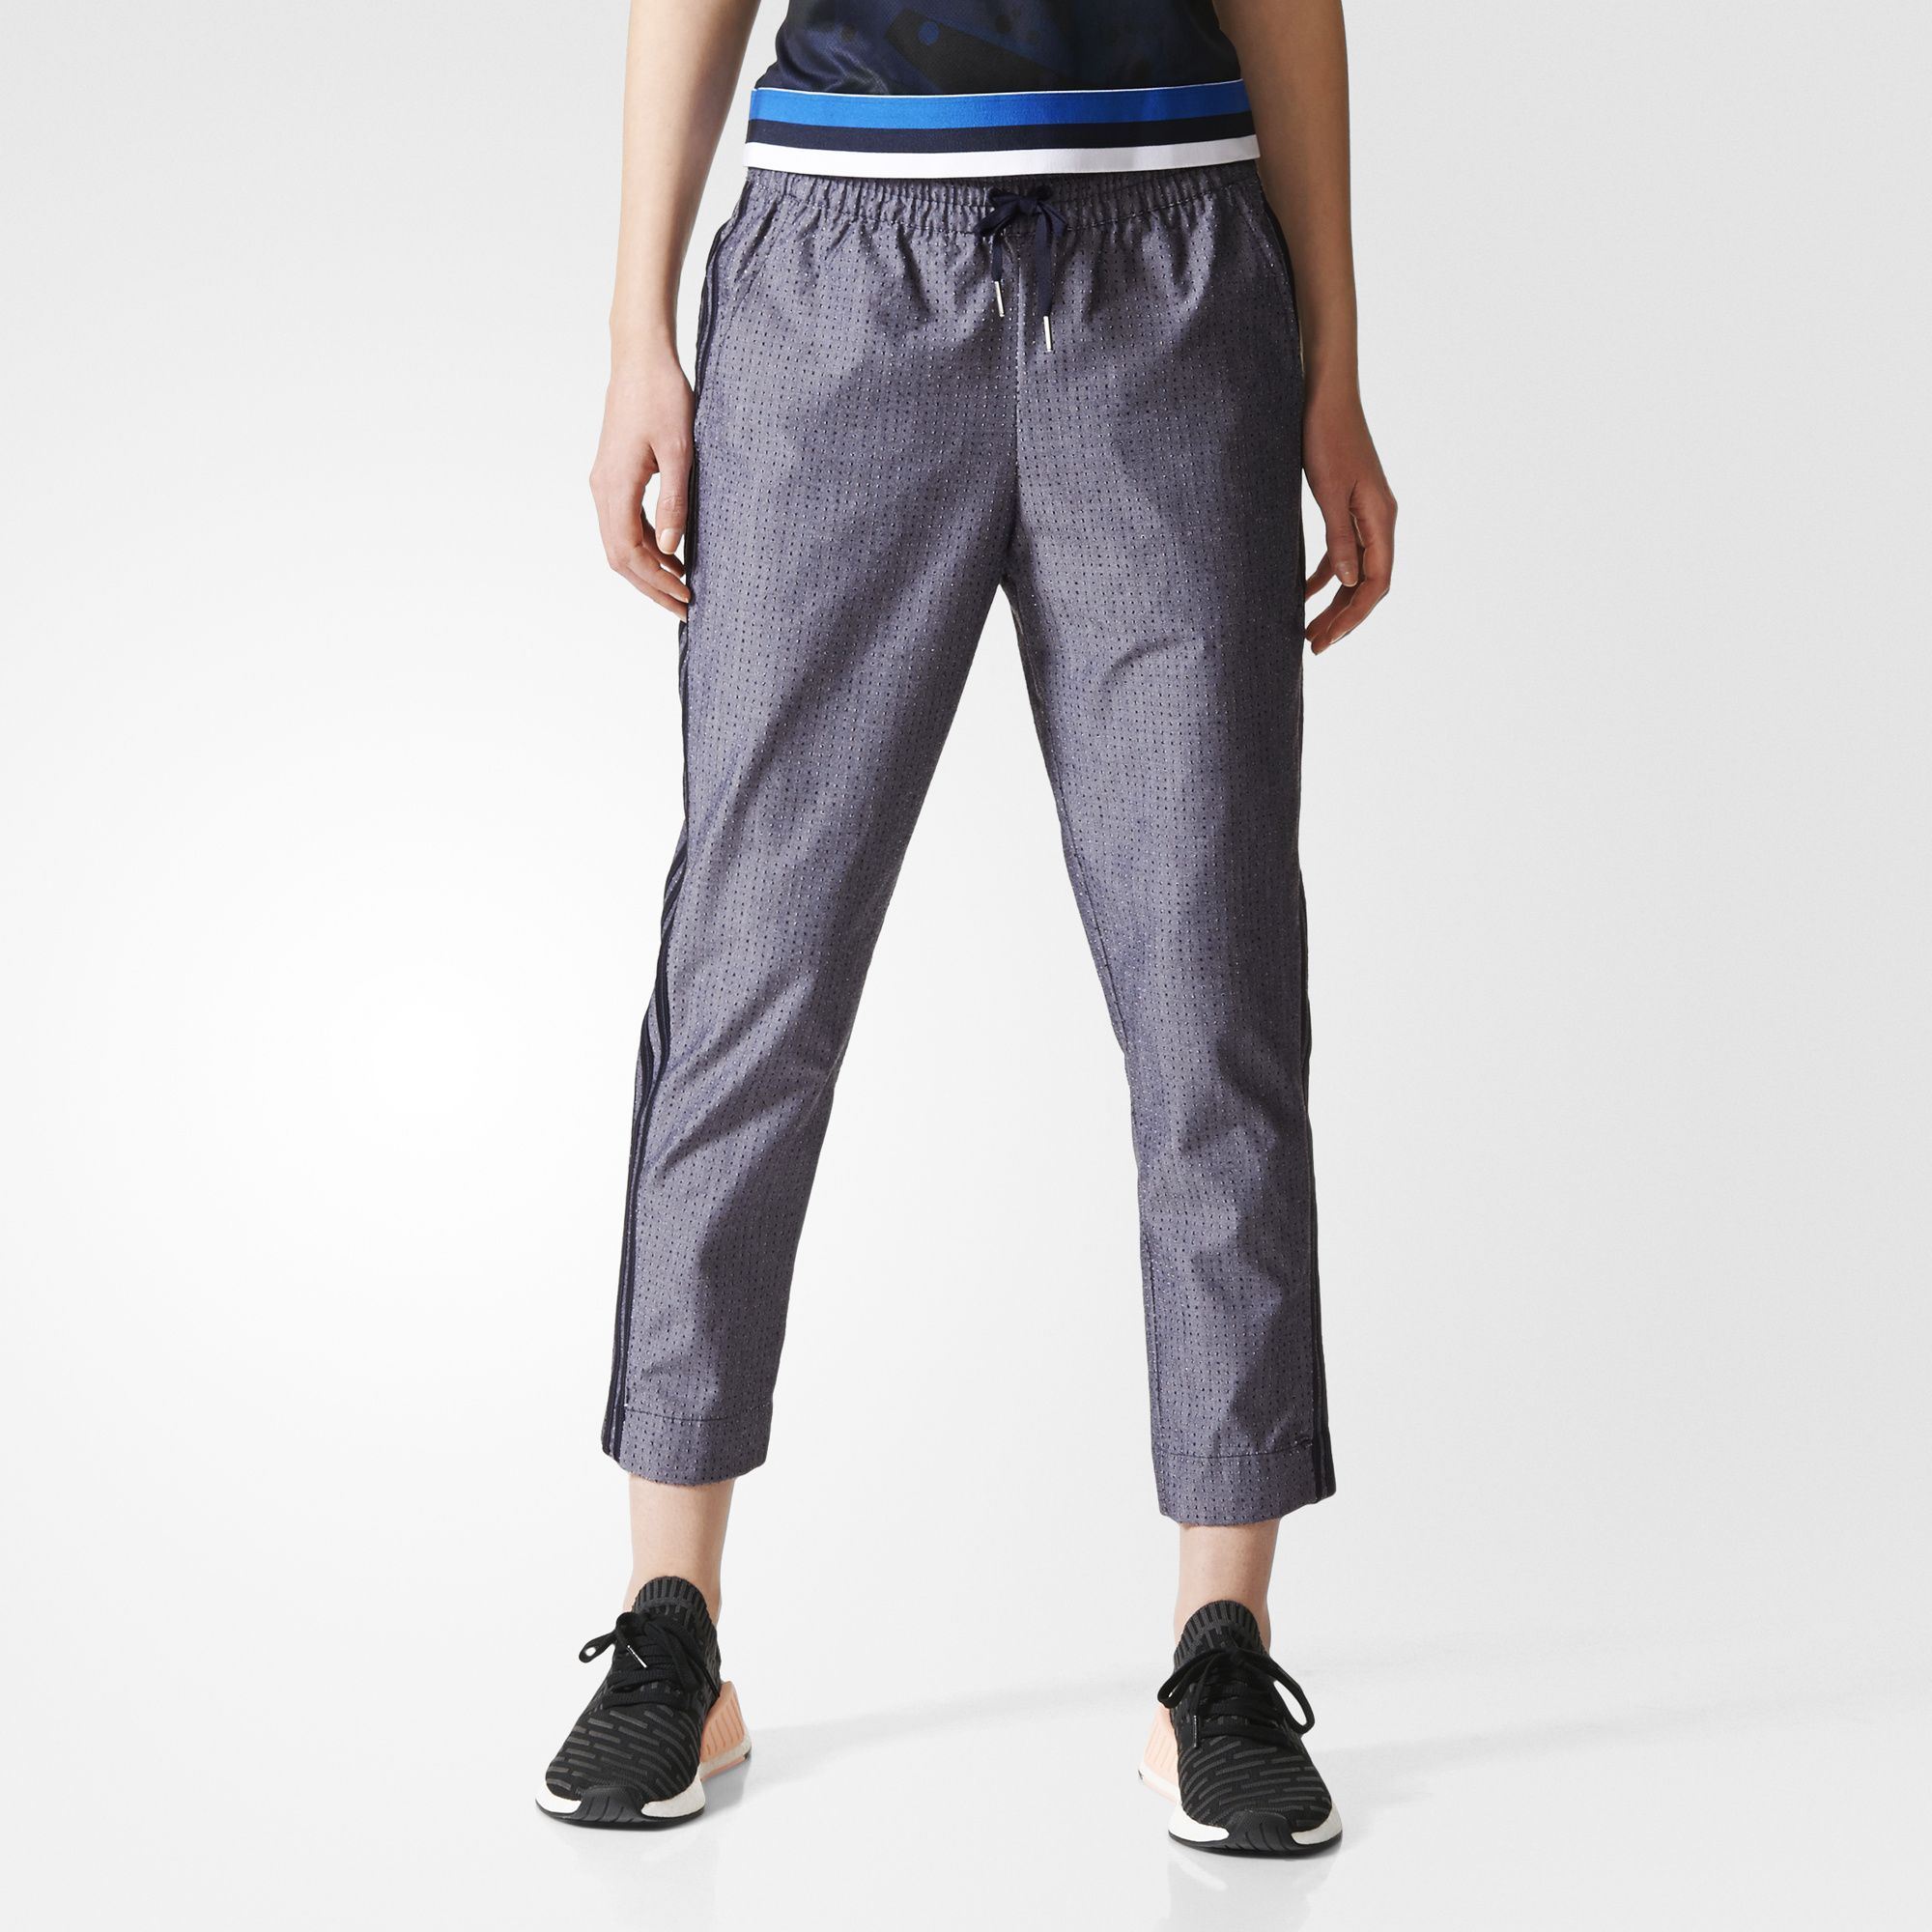 women's track pants with stripe